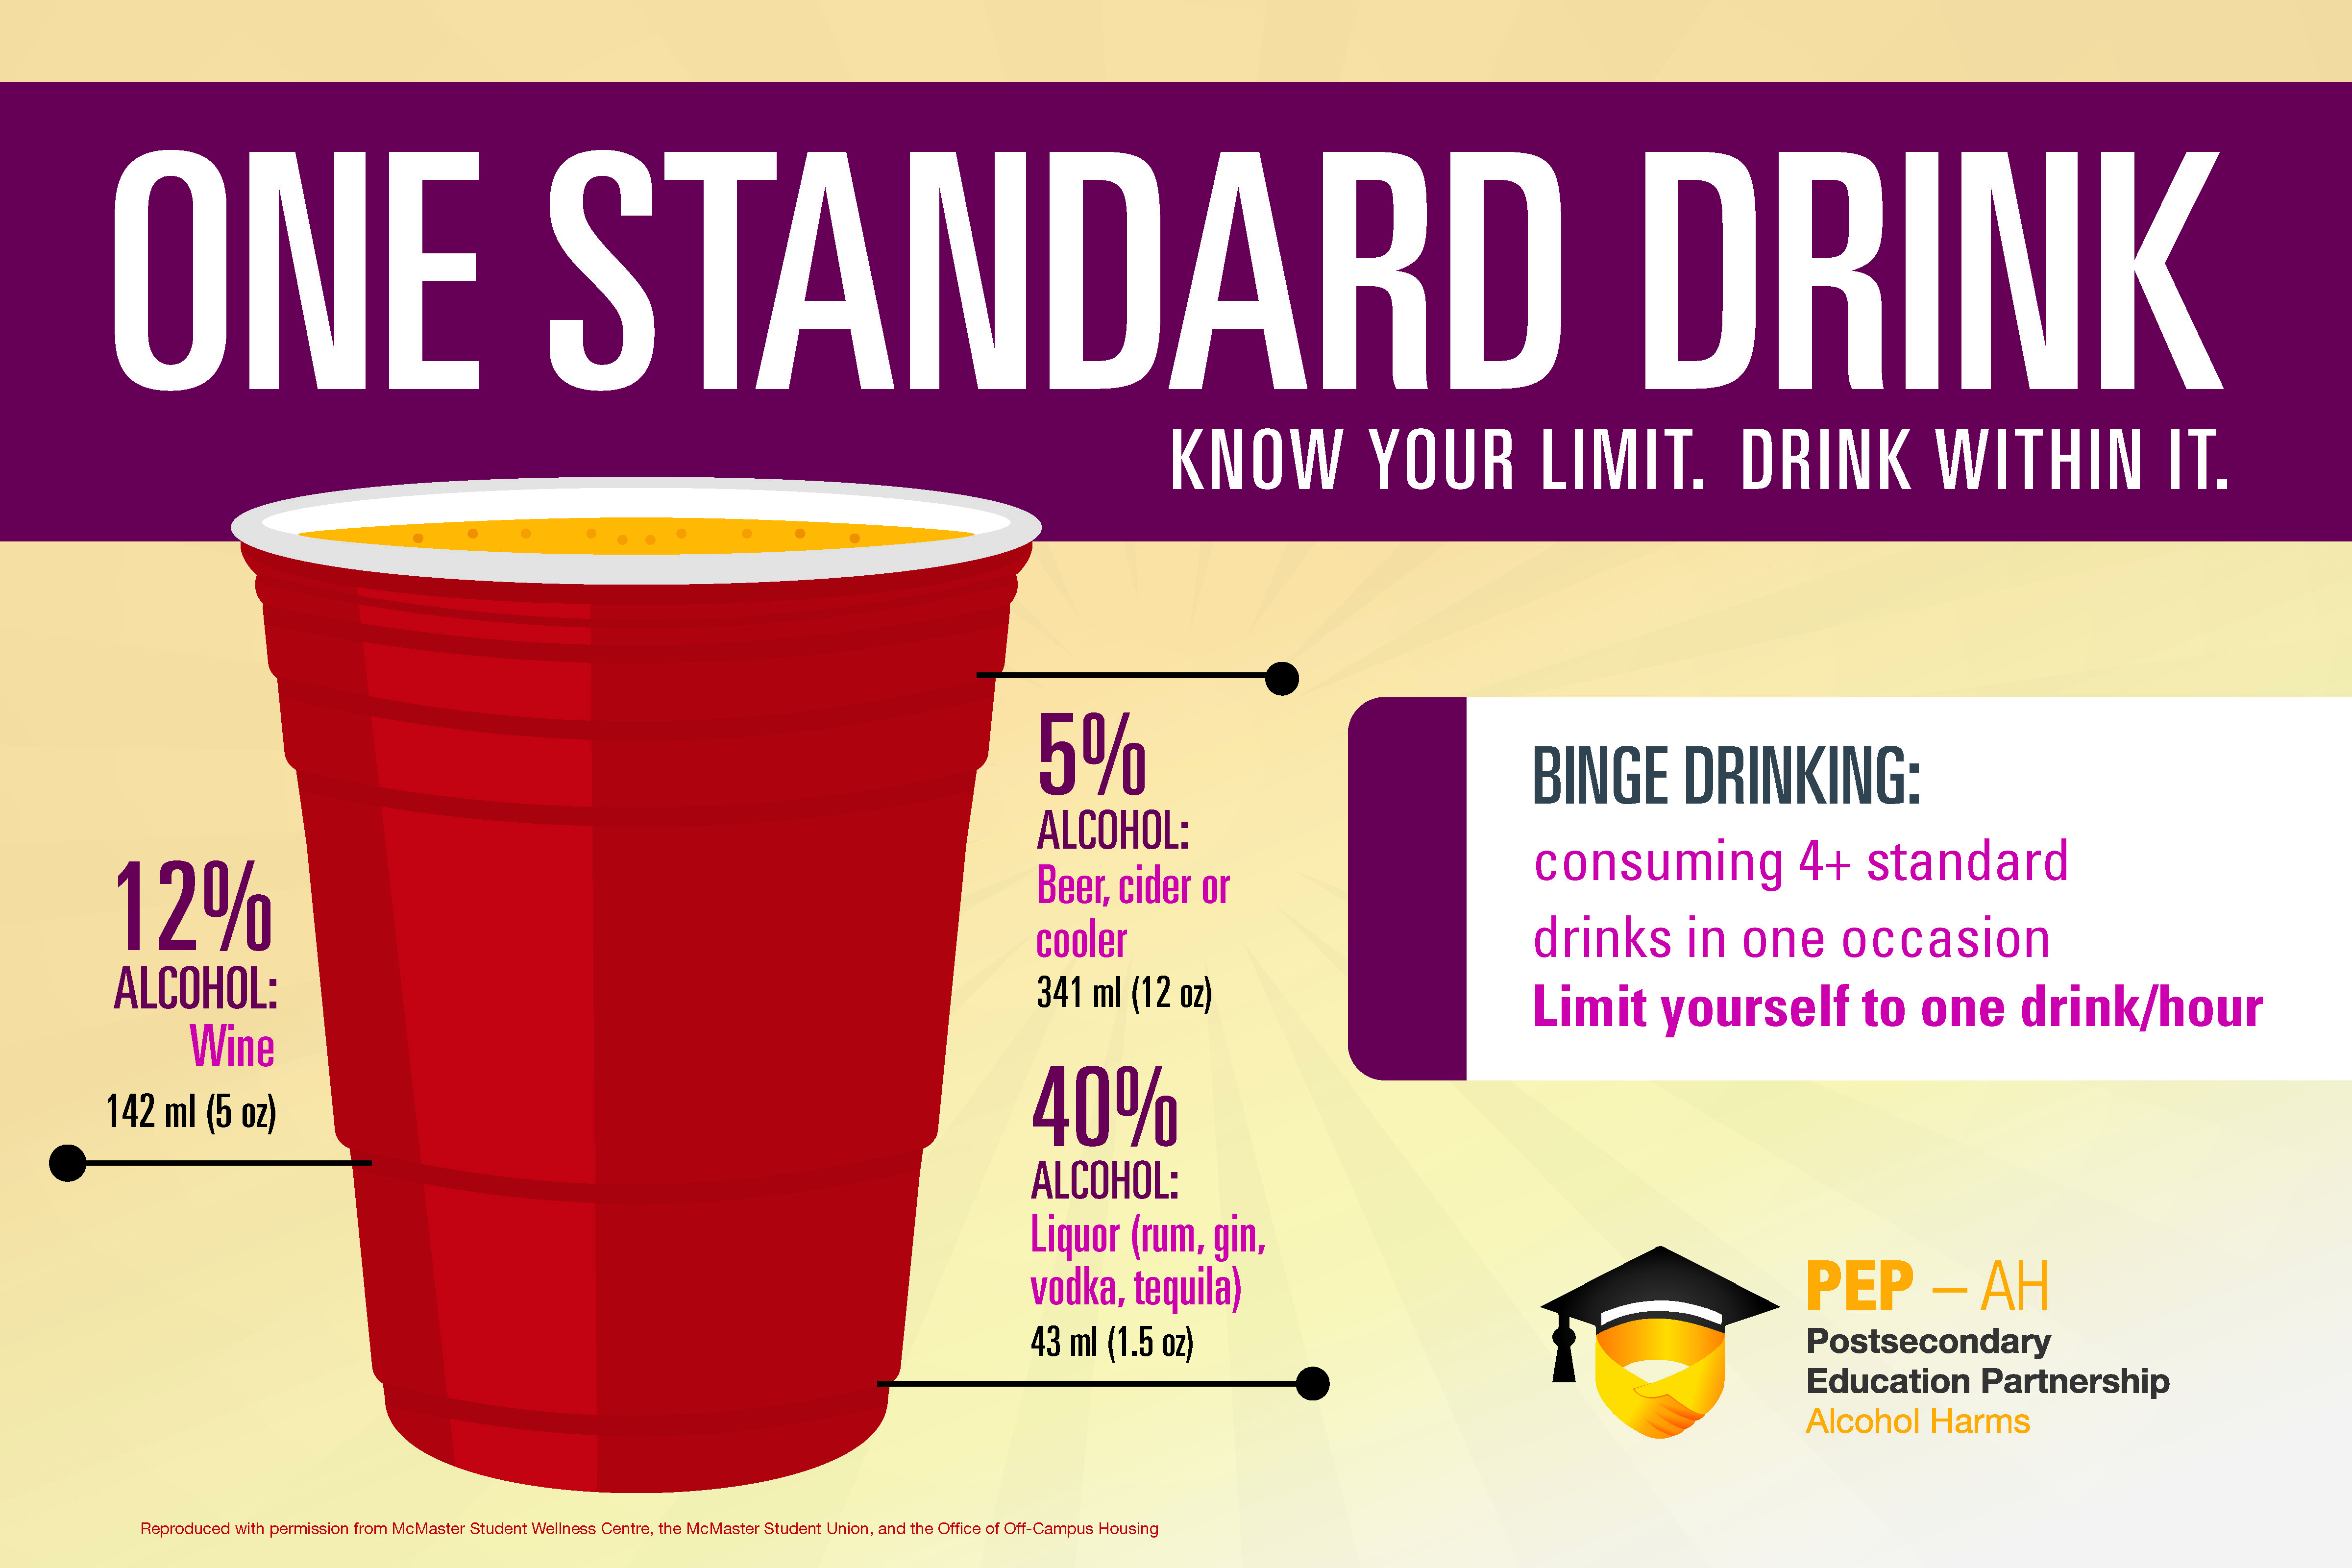 One Standard Drink: Know Your Limit